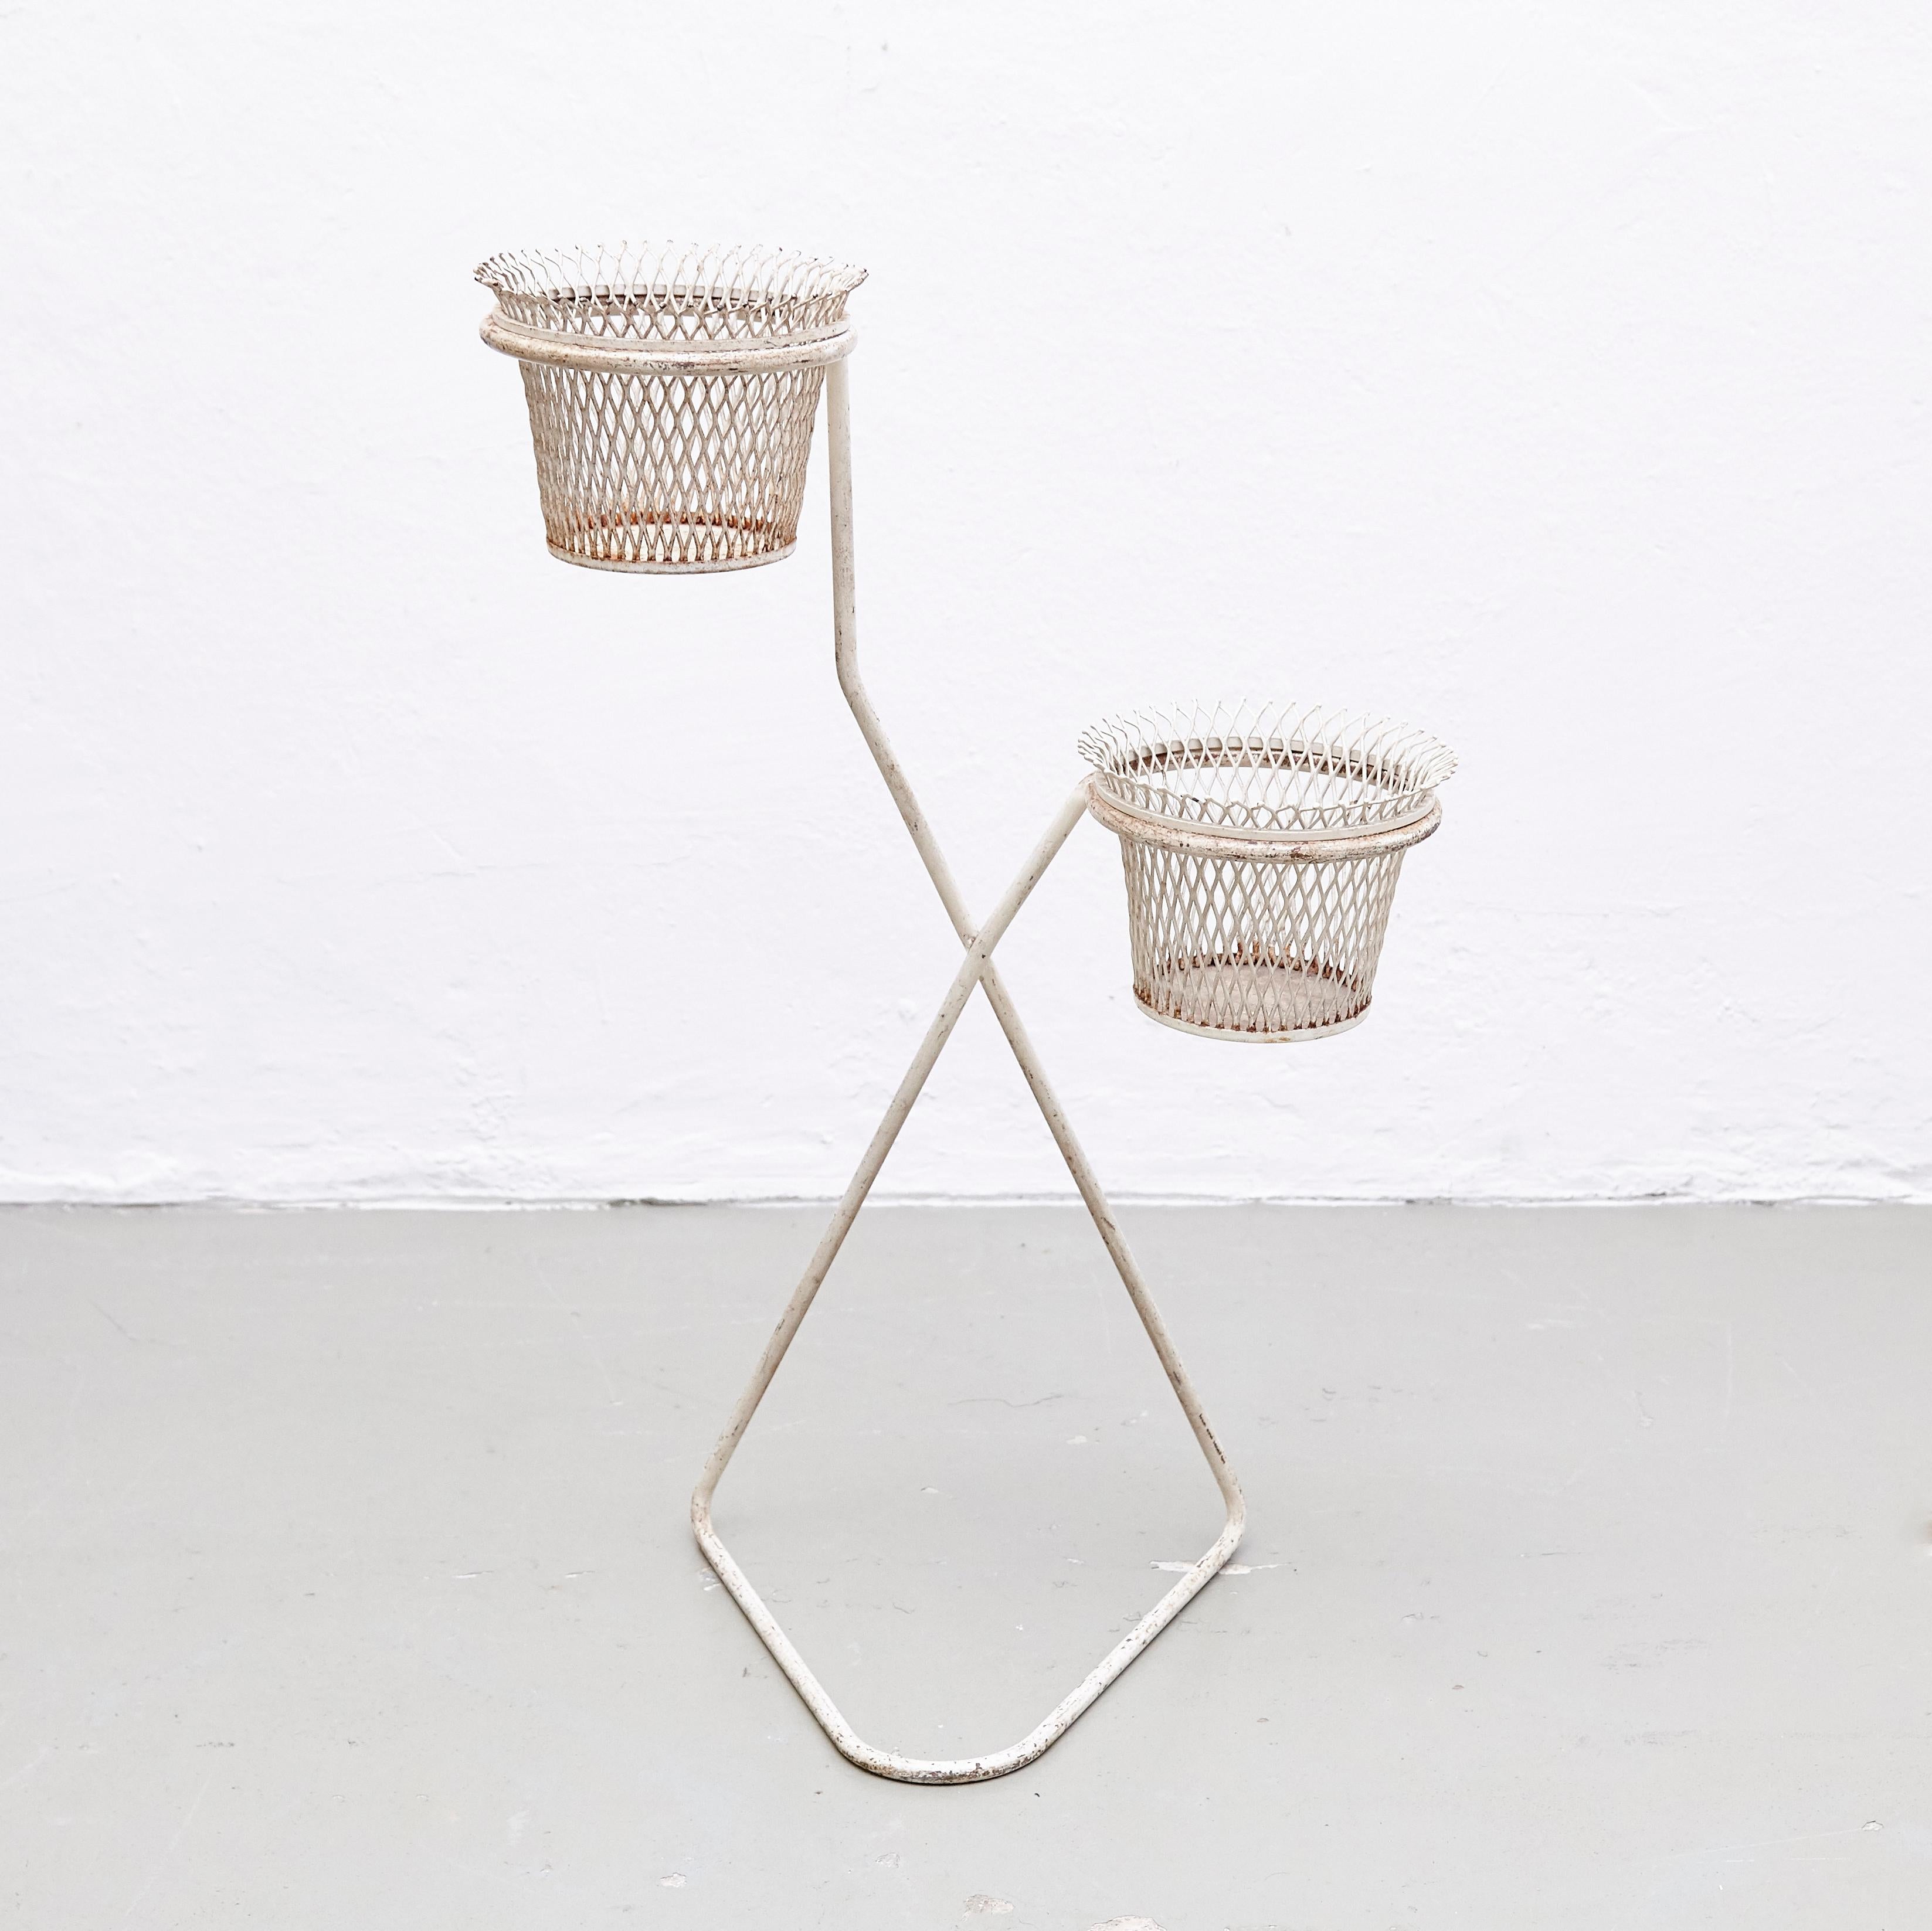 Plant stand designed by Mathieu Matégot, circa 1950.
Manufactured in France.

Perforated and lacquered metal.

In good original condition, with minor wear consistent with age and use, preserving a beautiful patina.

Mathieu Matégot